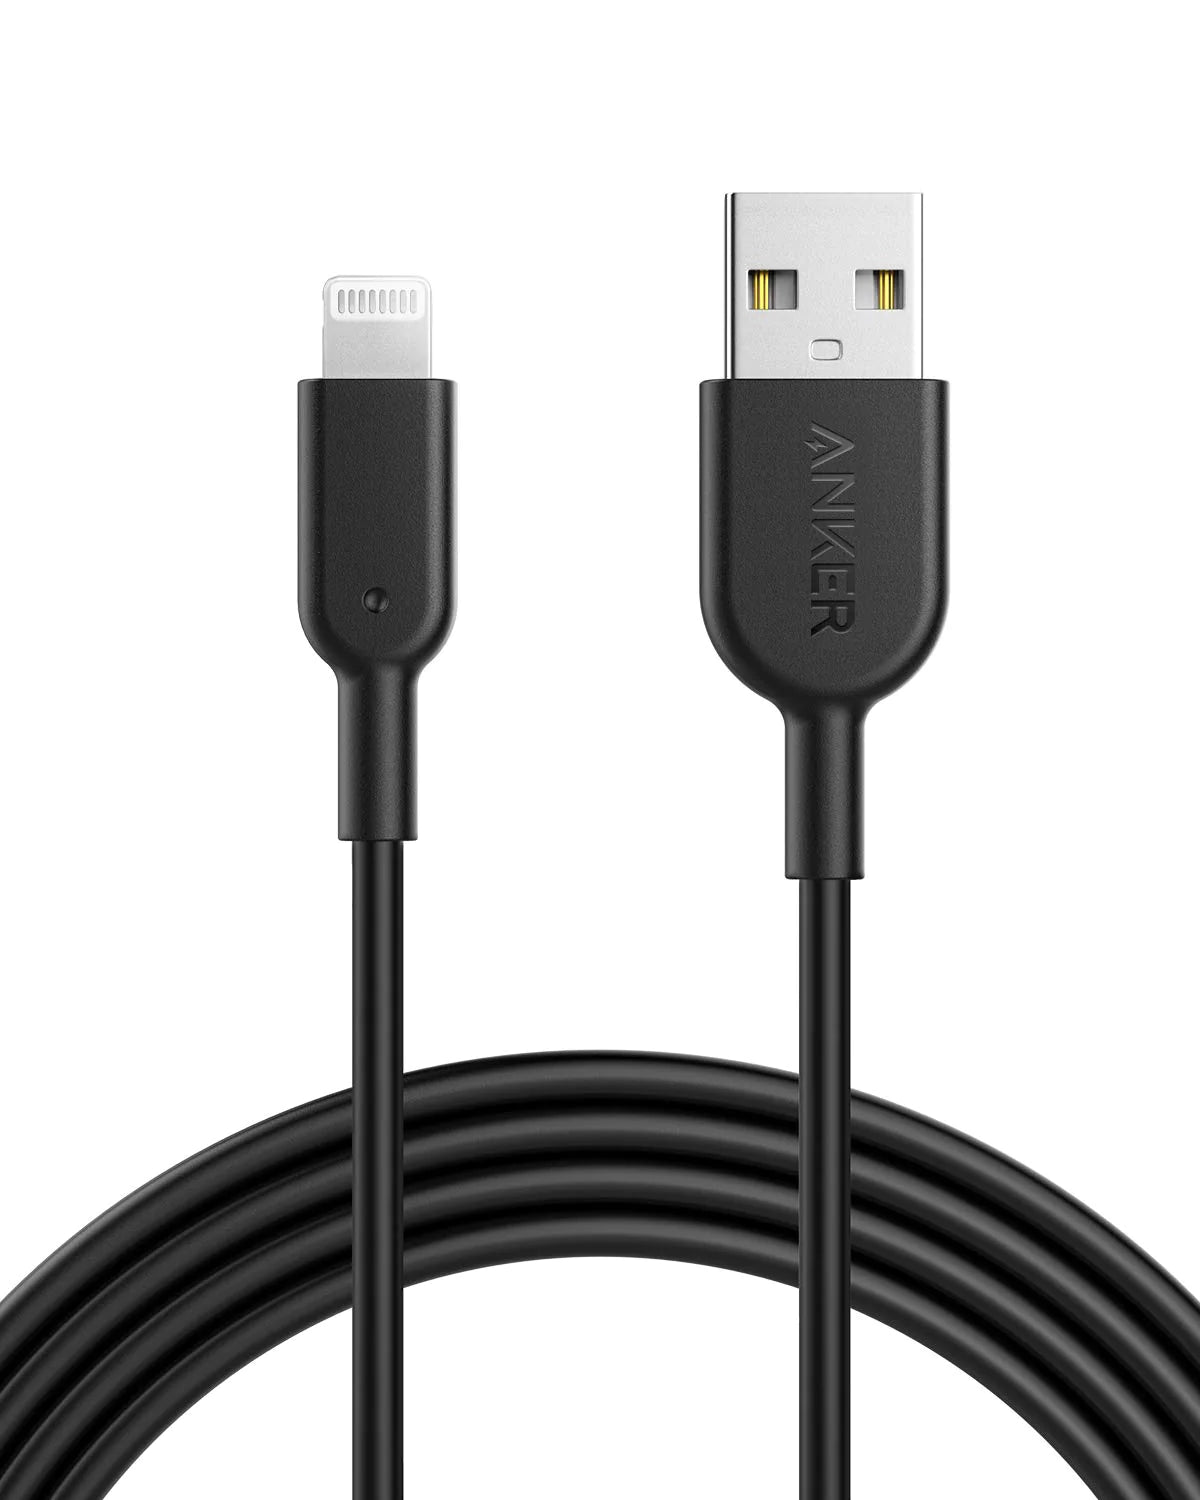 Anker Powerline II USB-A to Lightning Cable 0.9m - Black with 18 months official warranty